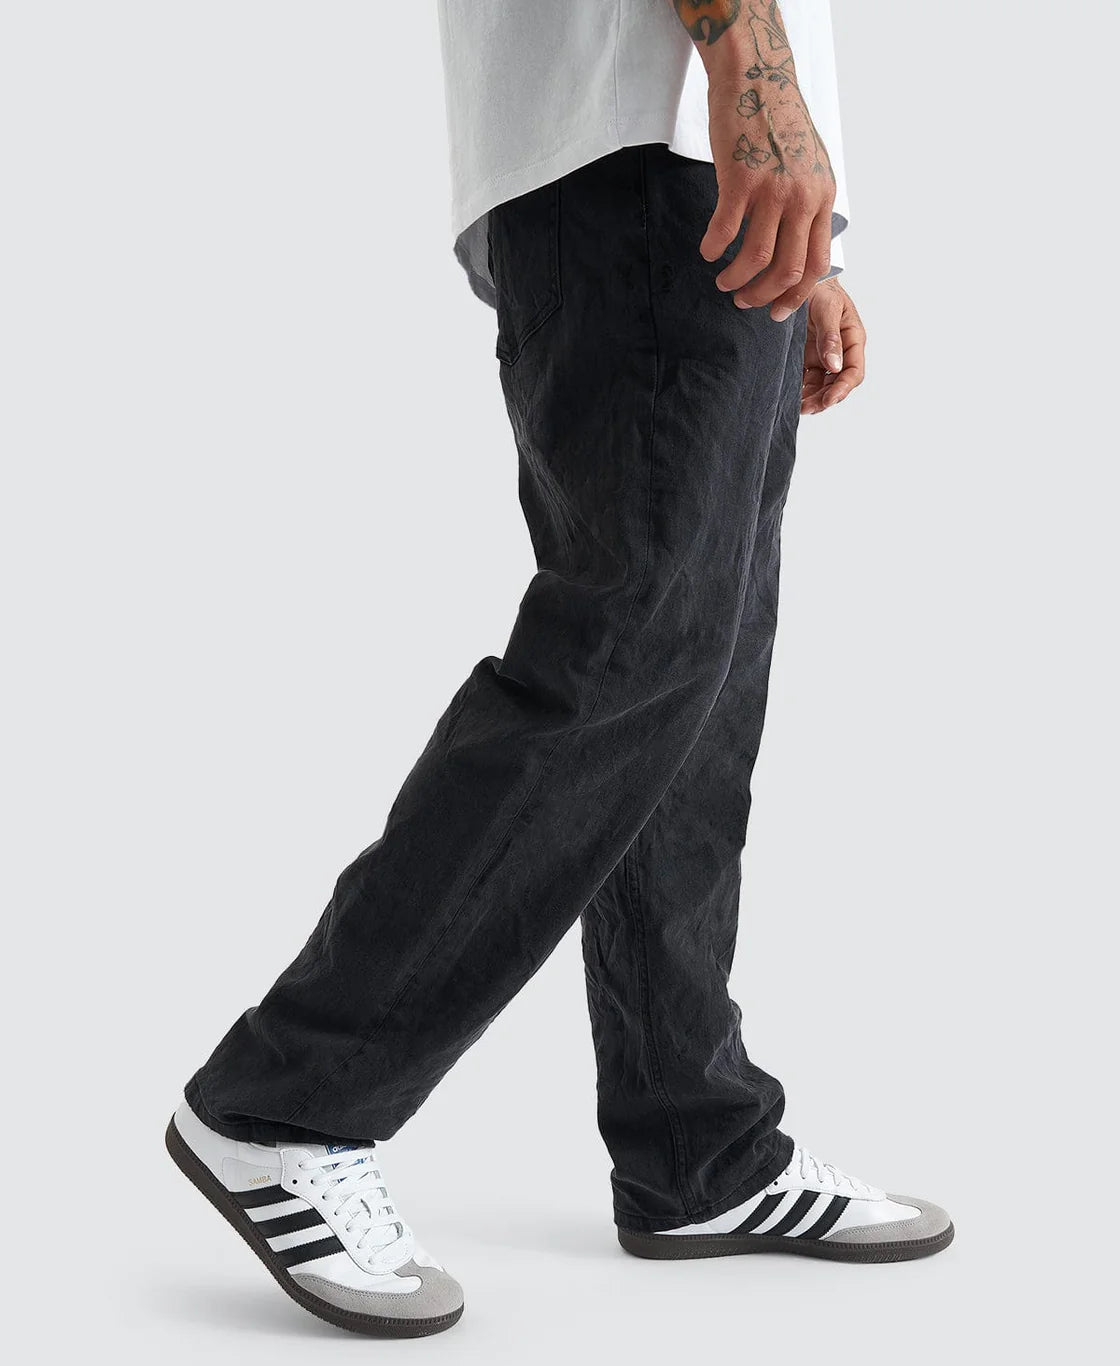 Kiss Chacey K5 Relaxed Fit Jean - Black Grey